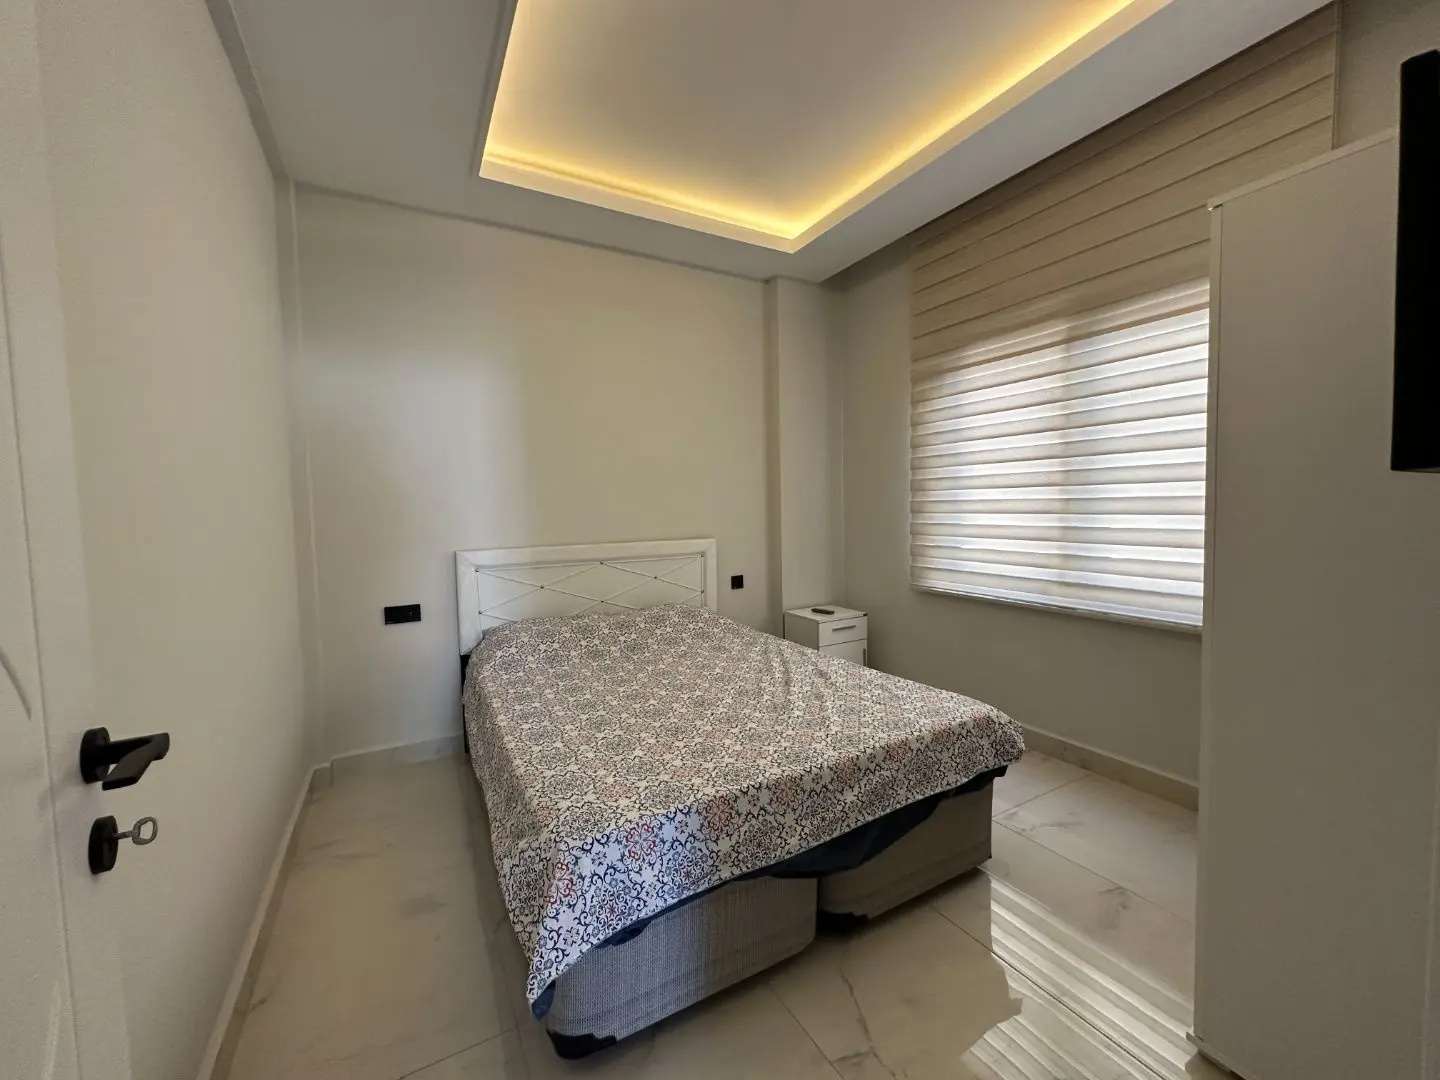 NEW 1+1 FURNISHED FLAT IN ALANYA CENTER